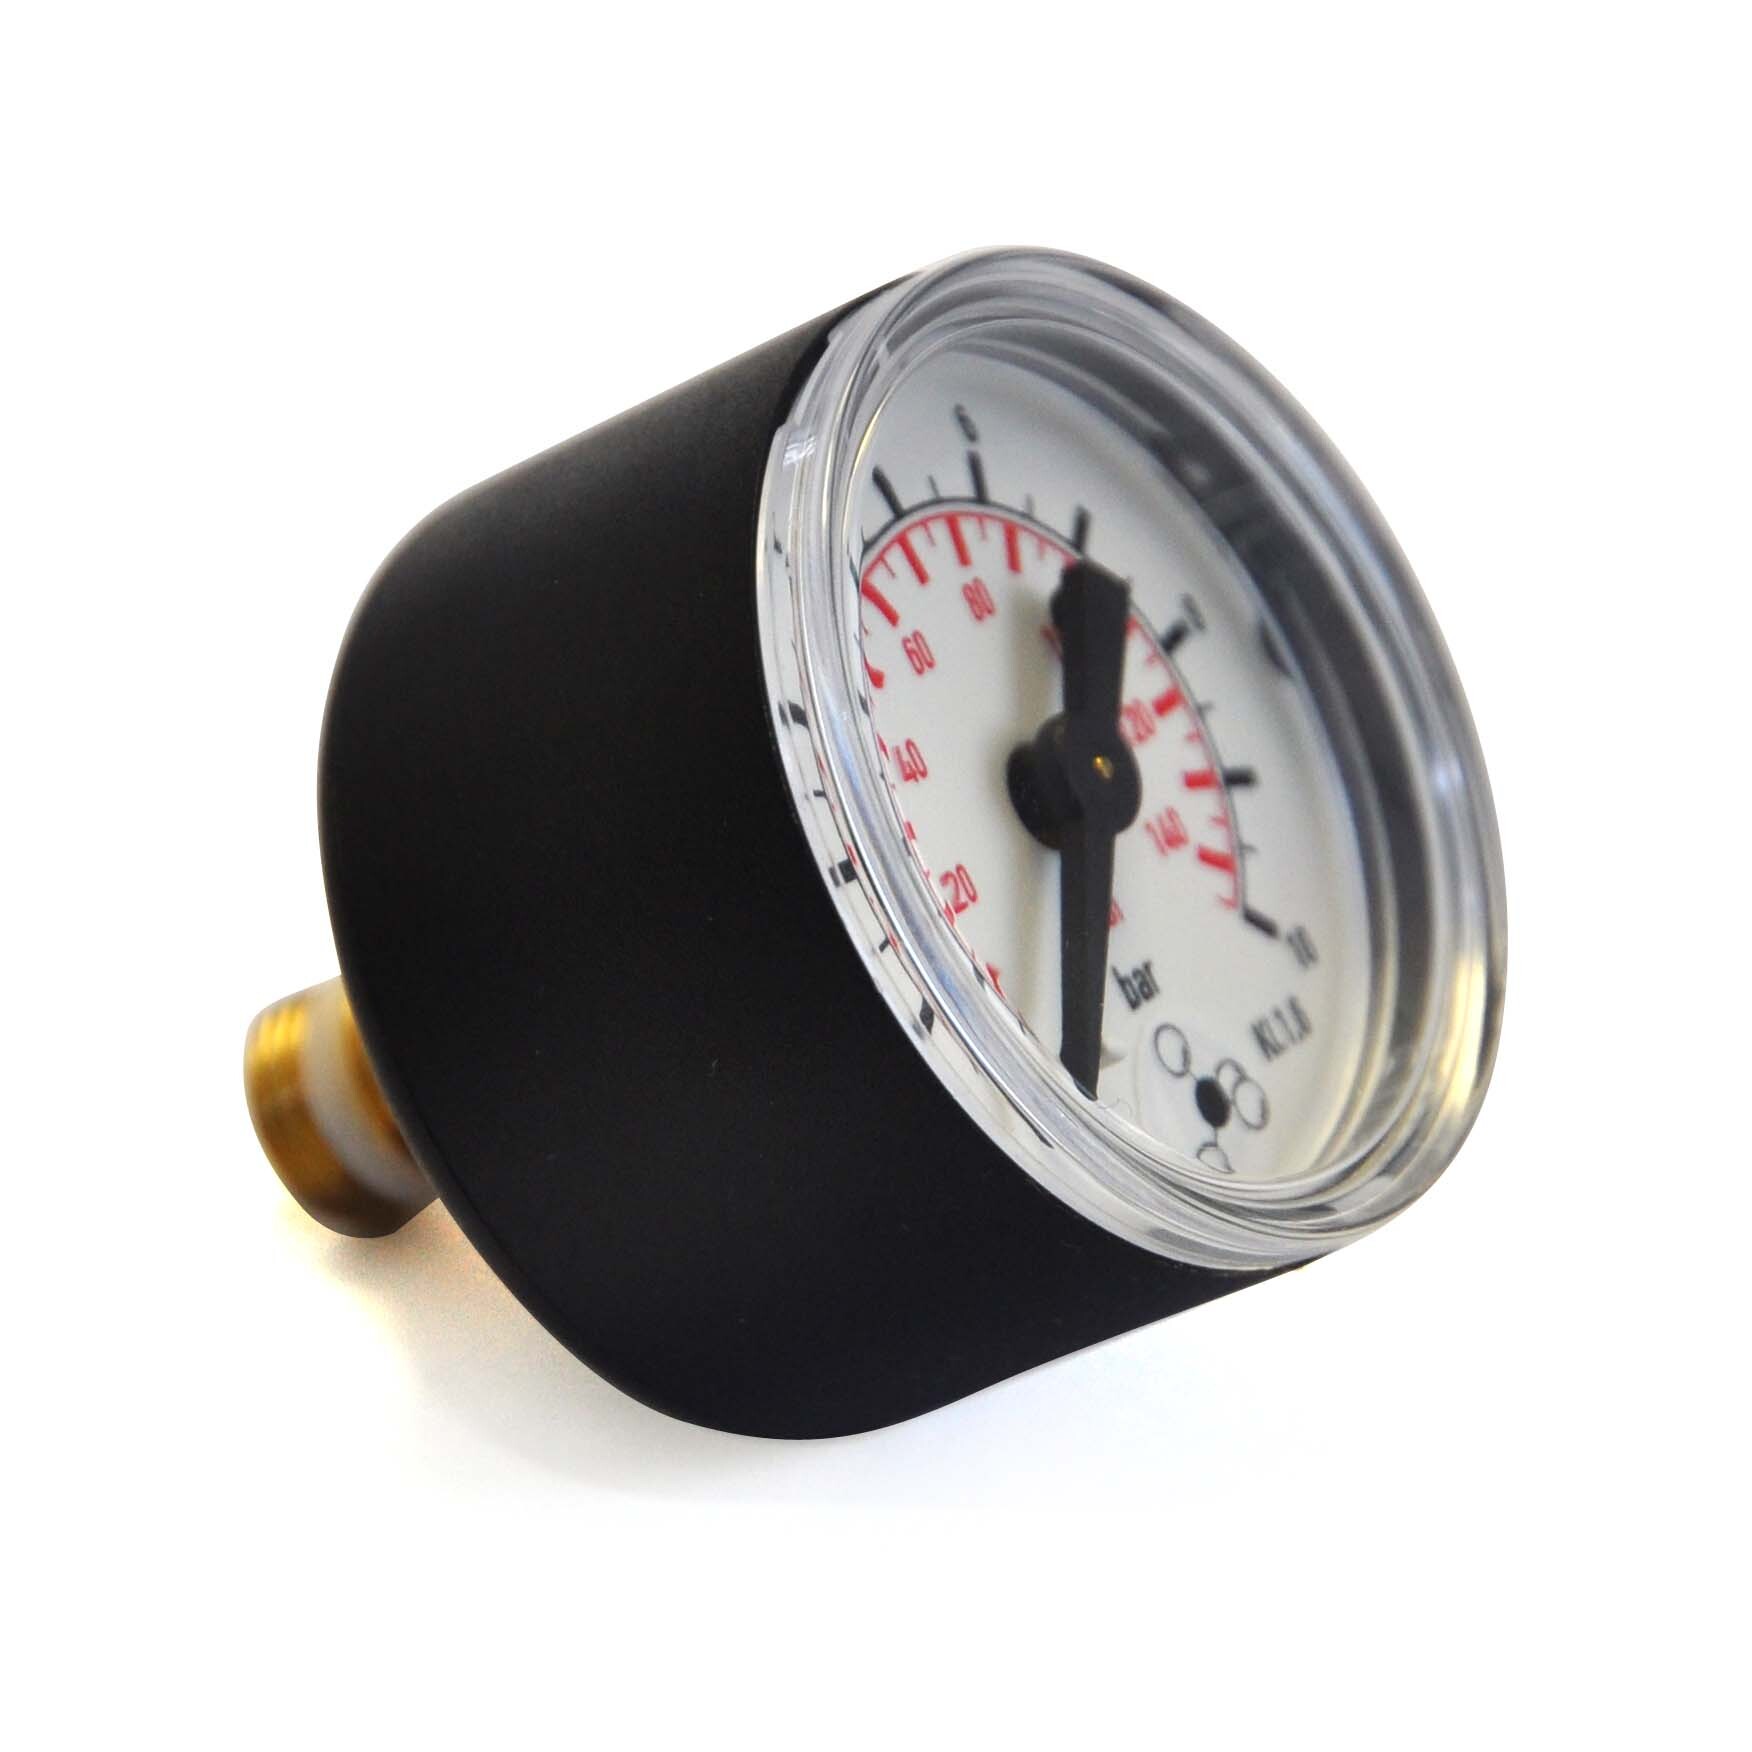 Pressure manometer 0 - 10 bar 
Class 1.6
Connection rear, G 1/8 "